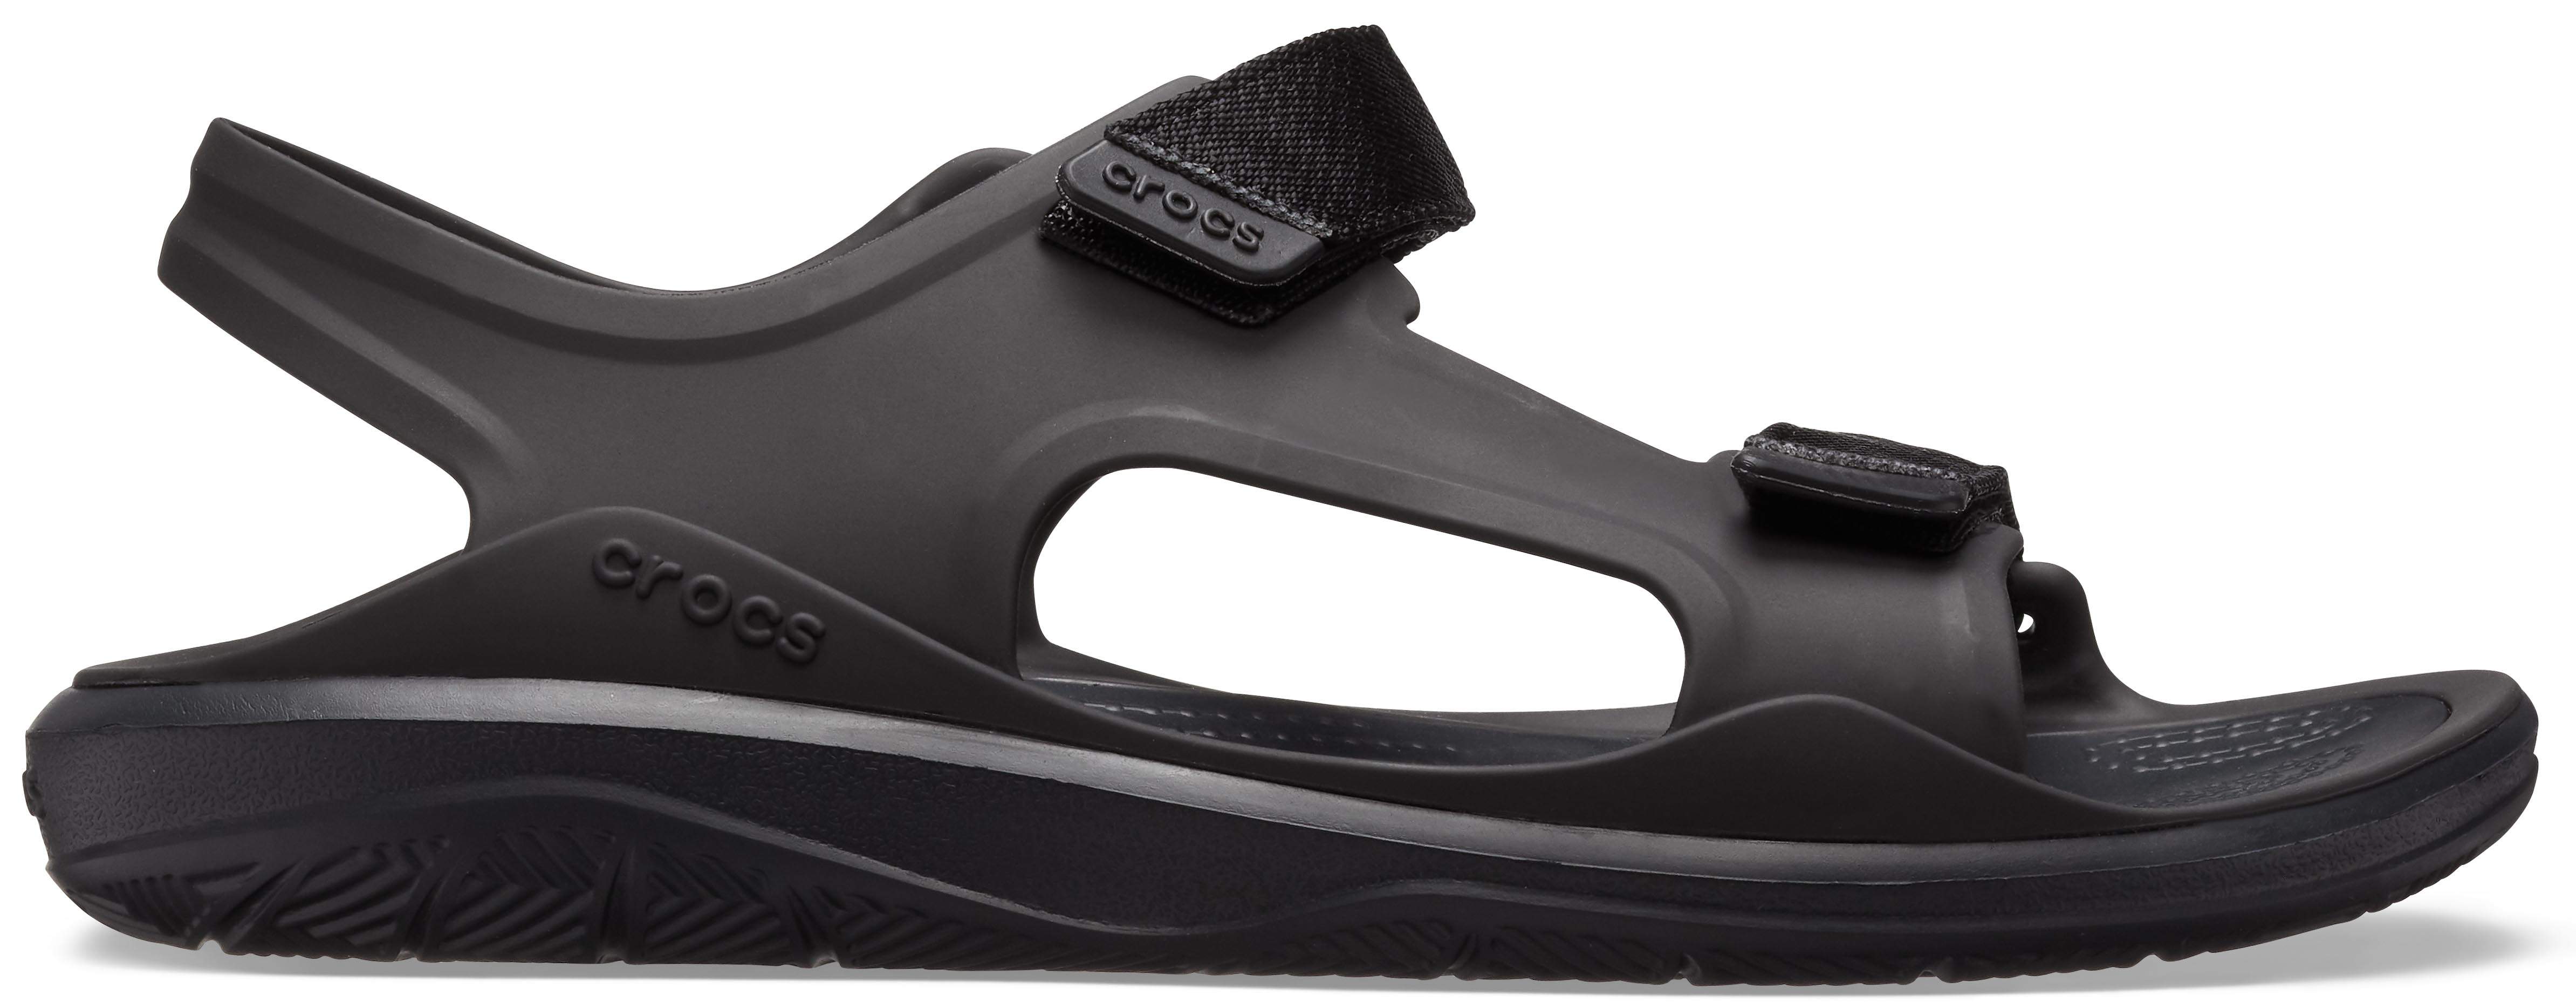 crocs swiftwater review